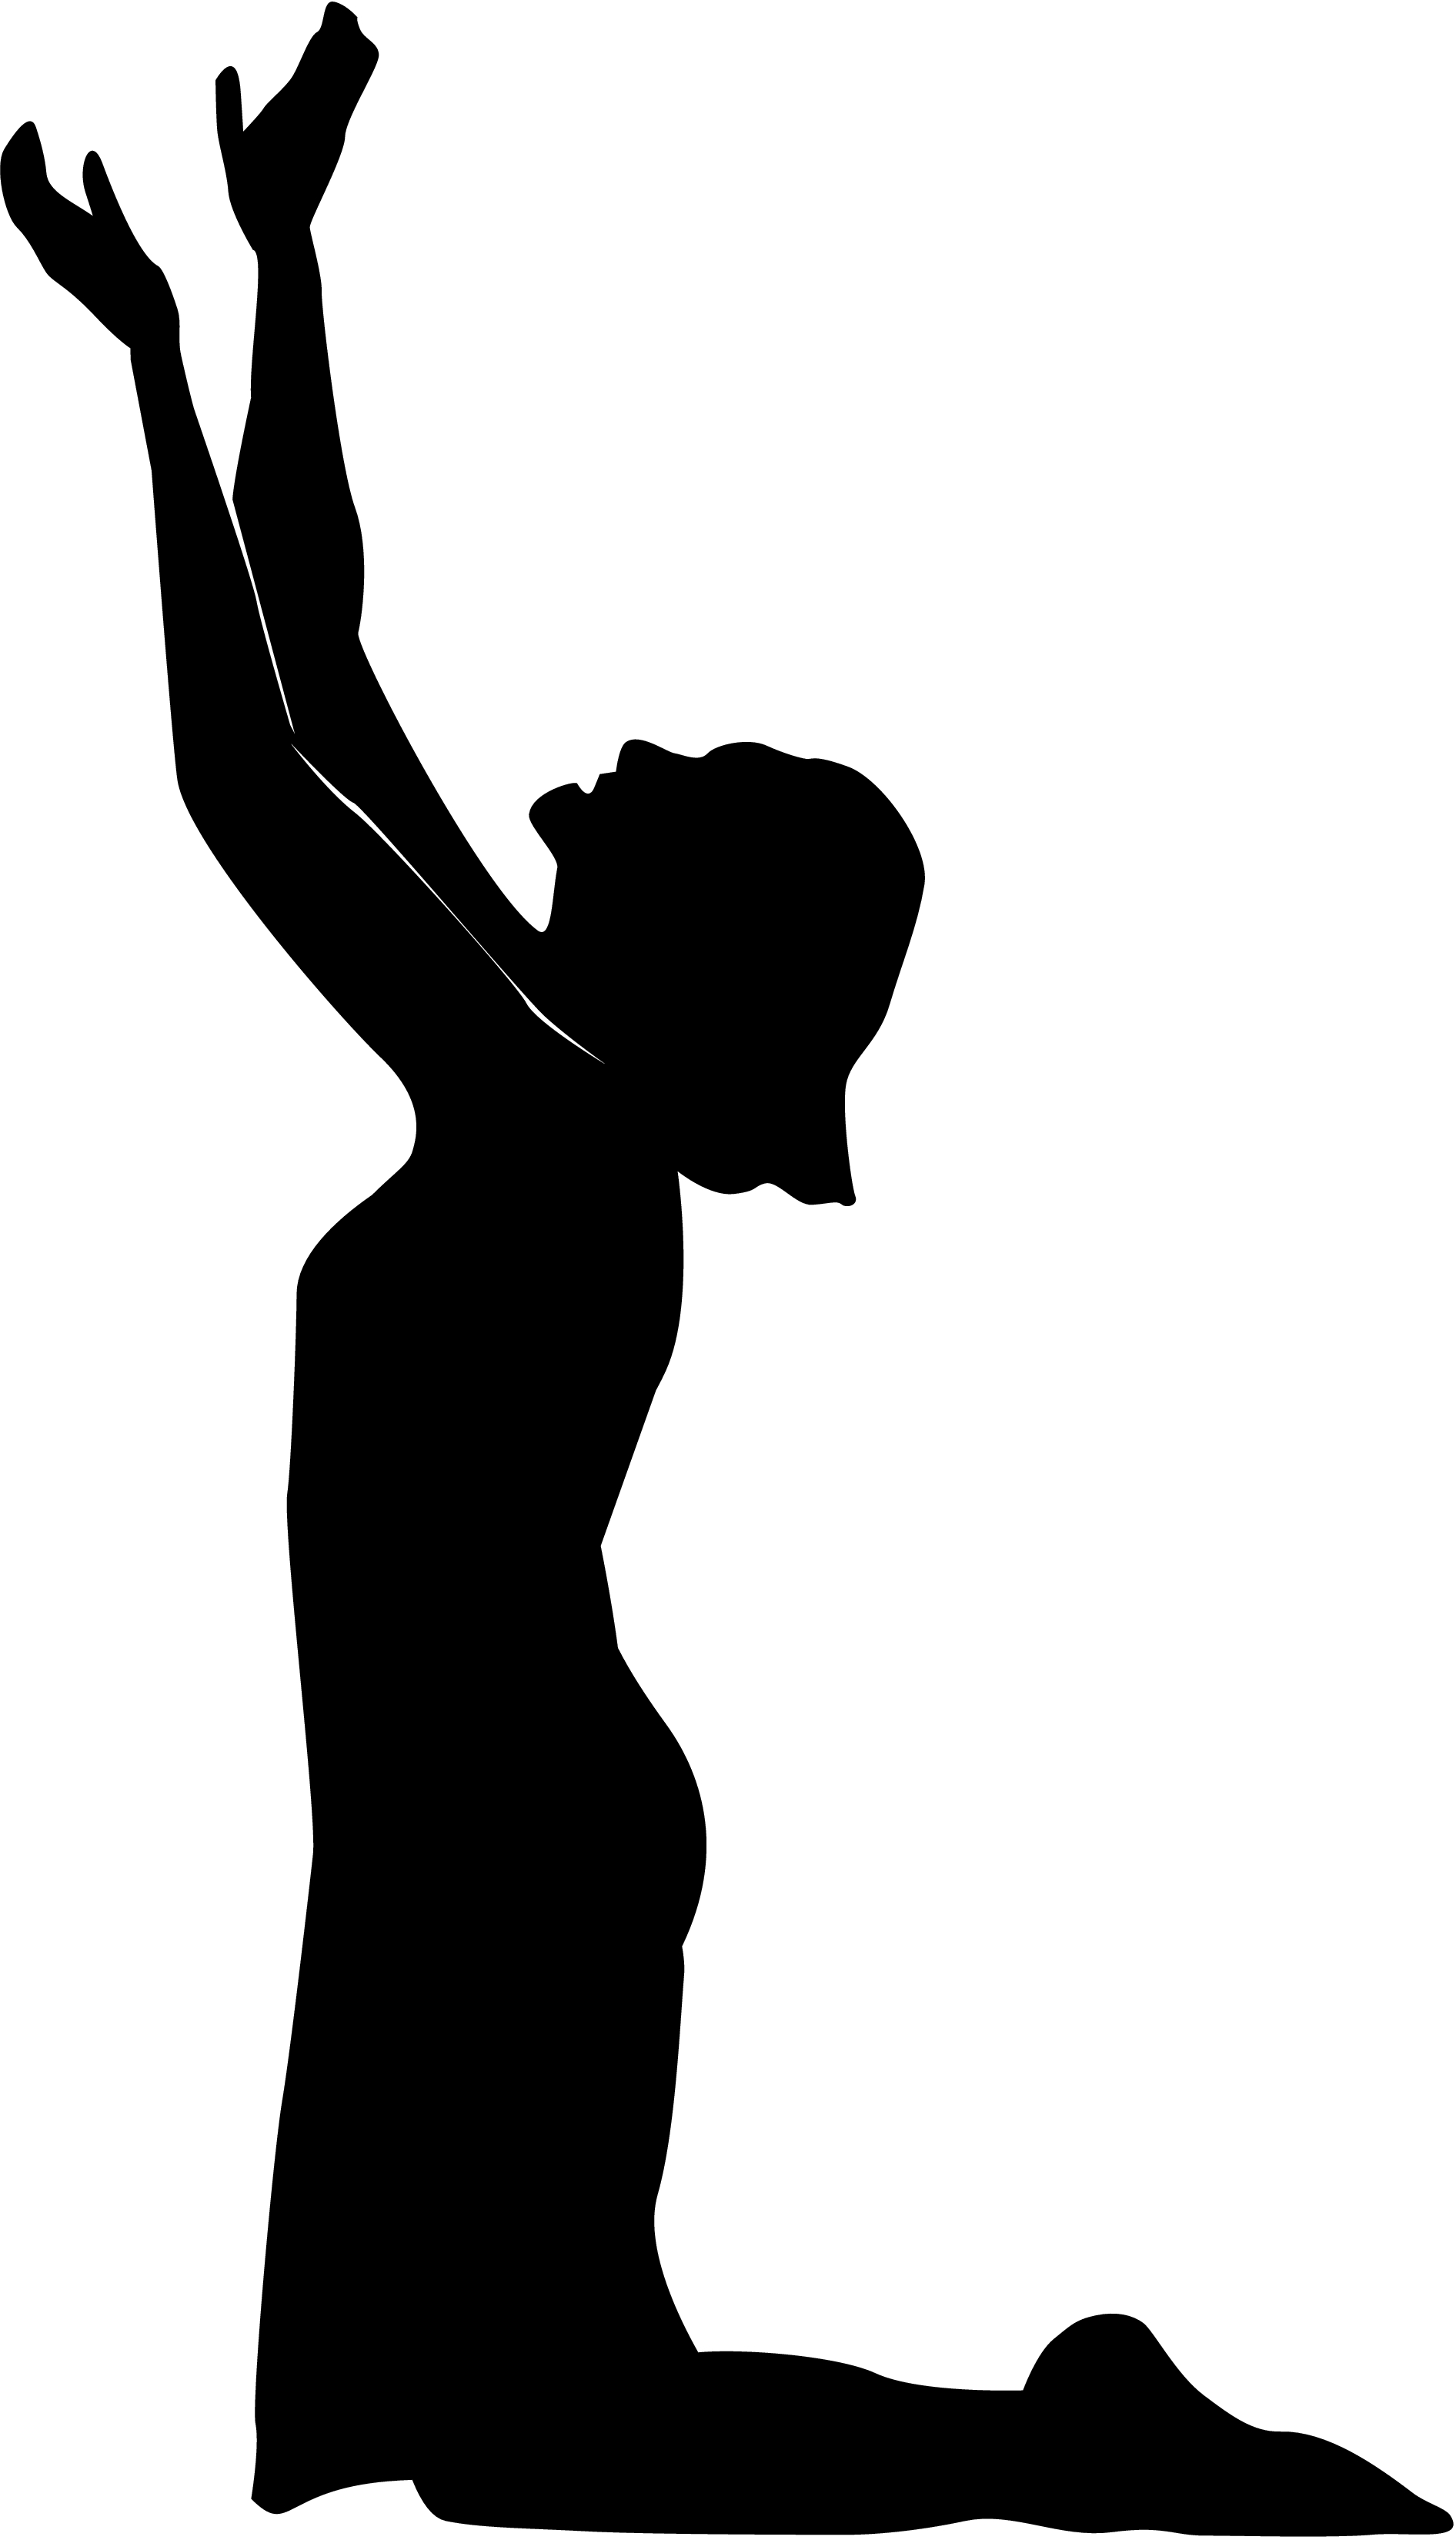 14 Praying Hands Silhouette Free Cliparts That You Can Download To You